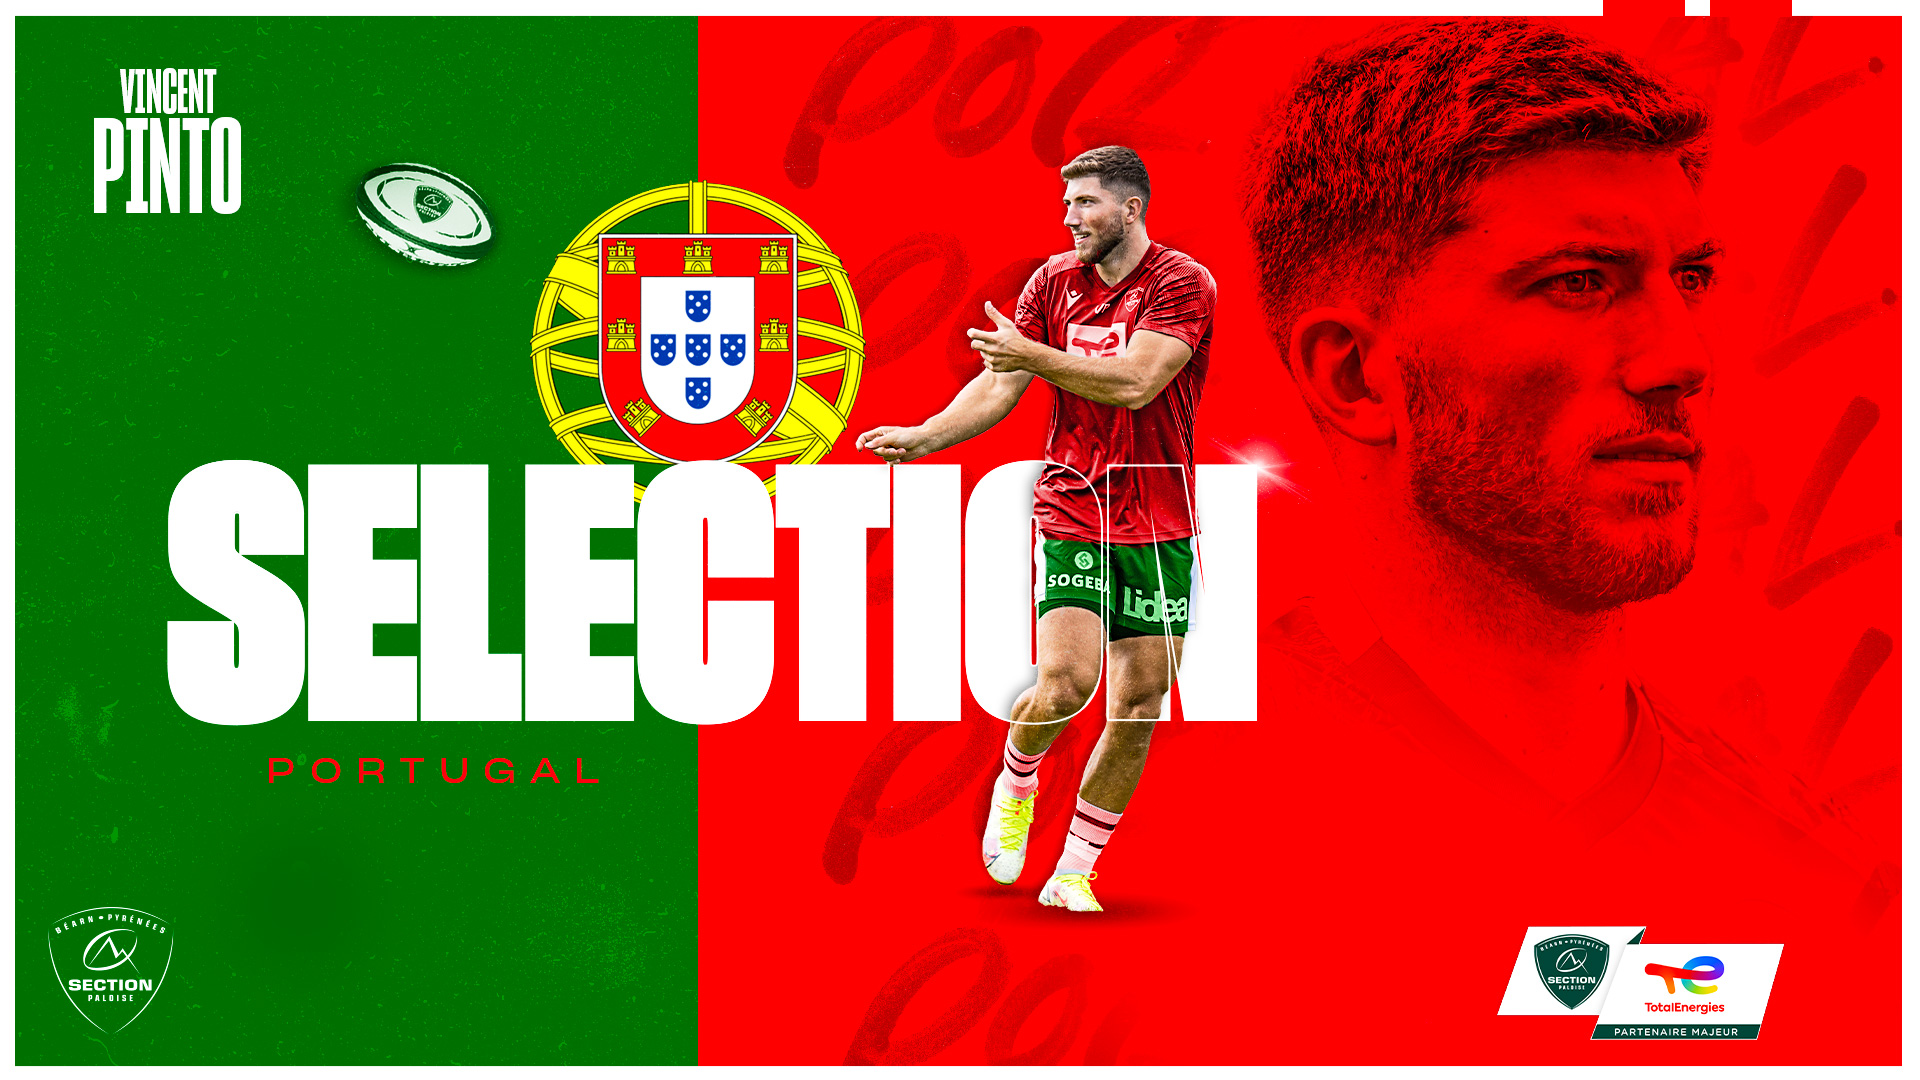 PORTUGAL SELECTION 1920x1080